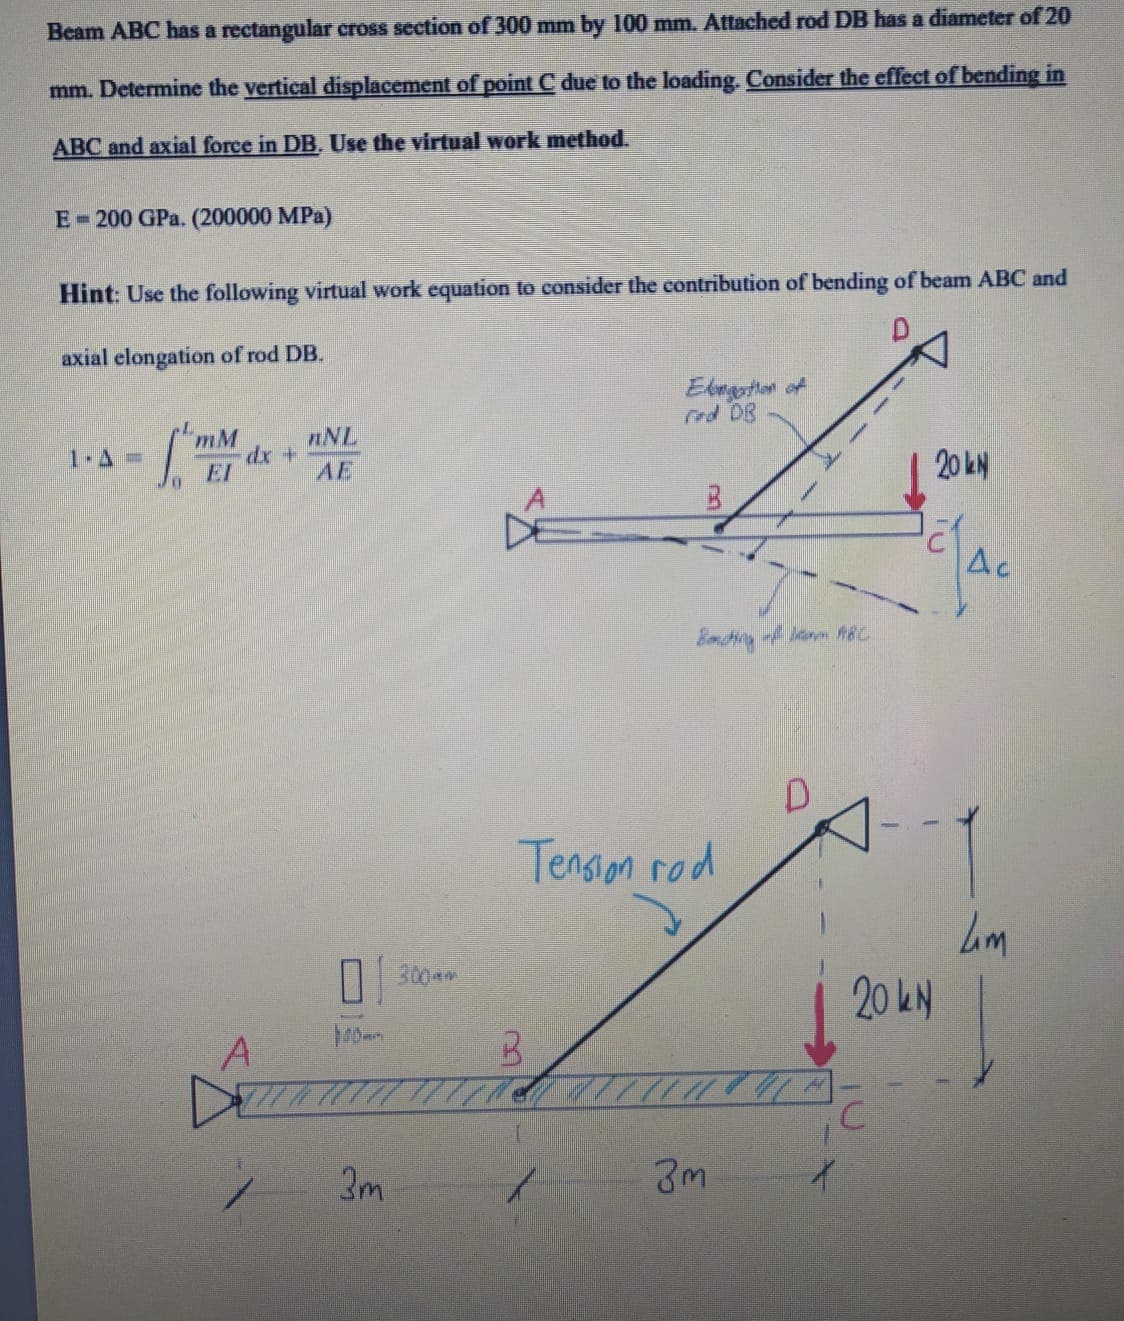 Beam ABC has a rectangular cross section of 300 mm by 100 mm. Attached rod DB has a diameter of 20
mm. Determine the vertical displacement of point C due to the loading. Consiđer the effect of bending in
ABC and axial force in DB. Use the virtual work method.
E-200 GPa. (200000 MPa)
Hint: Use the following virtual work equation to consider the contribution of bending of beam ABC and
axial elongation of rod DB.
Elegothon of
rod DB
mM
nNL
dx+
AE
1 A=
20 kN
EI
Ac
Tension rod
| 300 am
20 kN
40m
3m
3m
